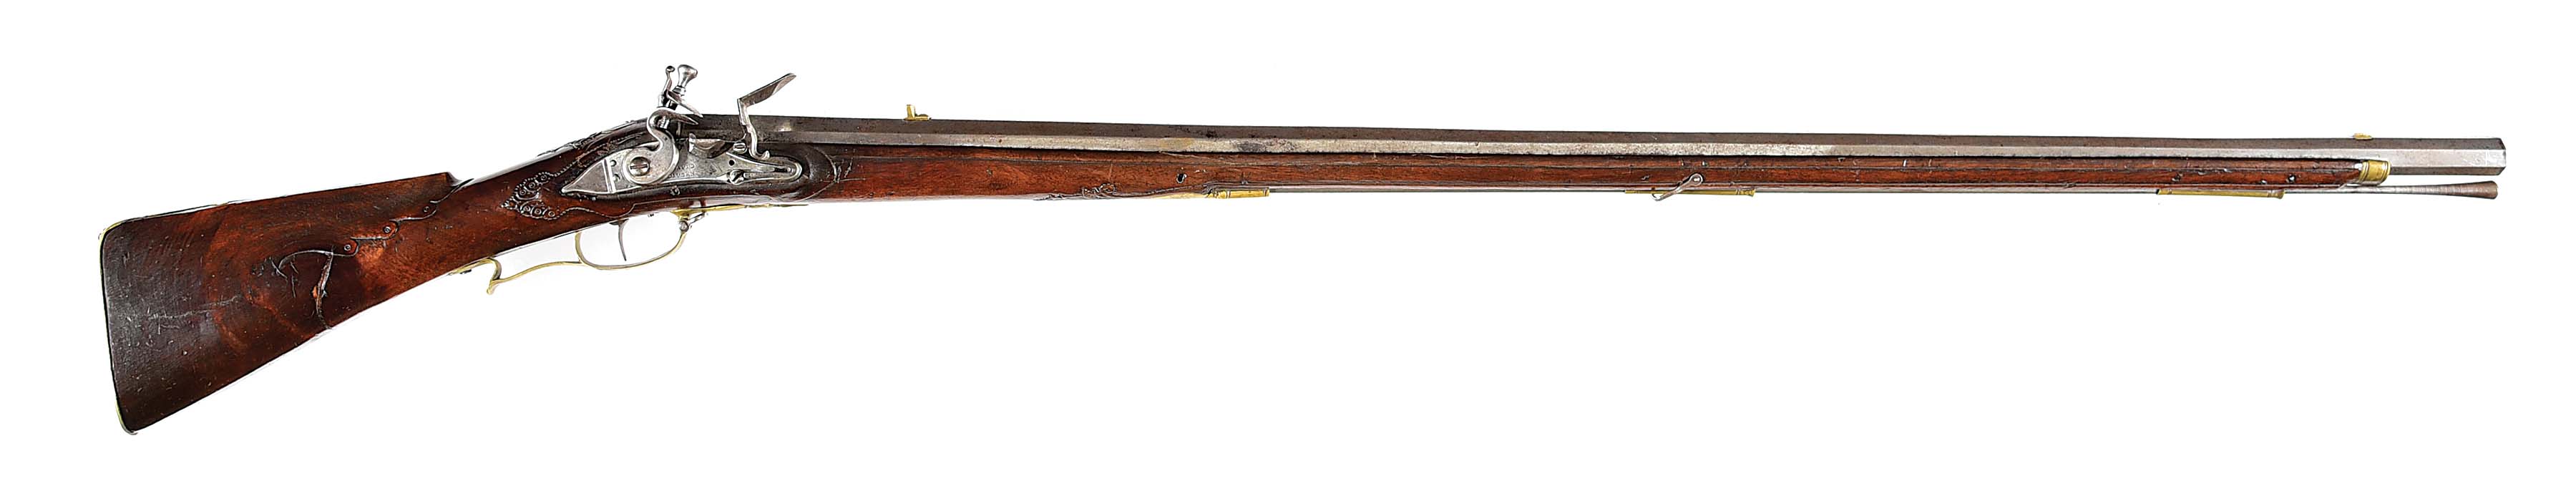 (A) EARLY FRENCH FLINTLOCK RIFLE SIGNED DAVID DIVORNE.